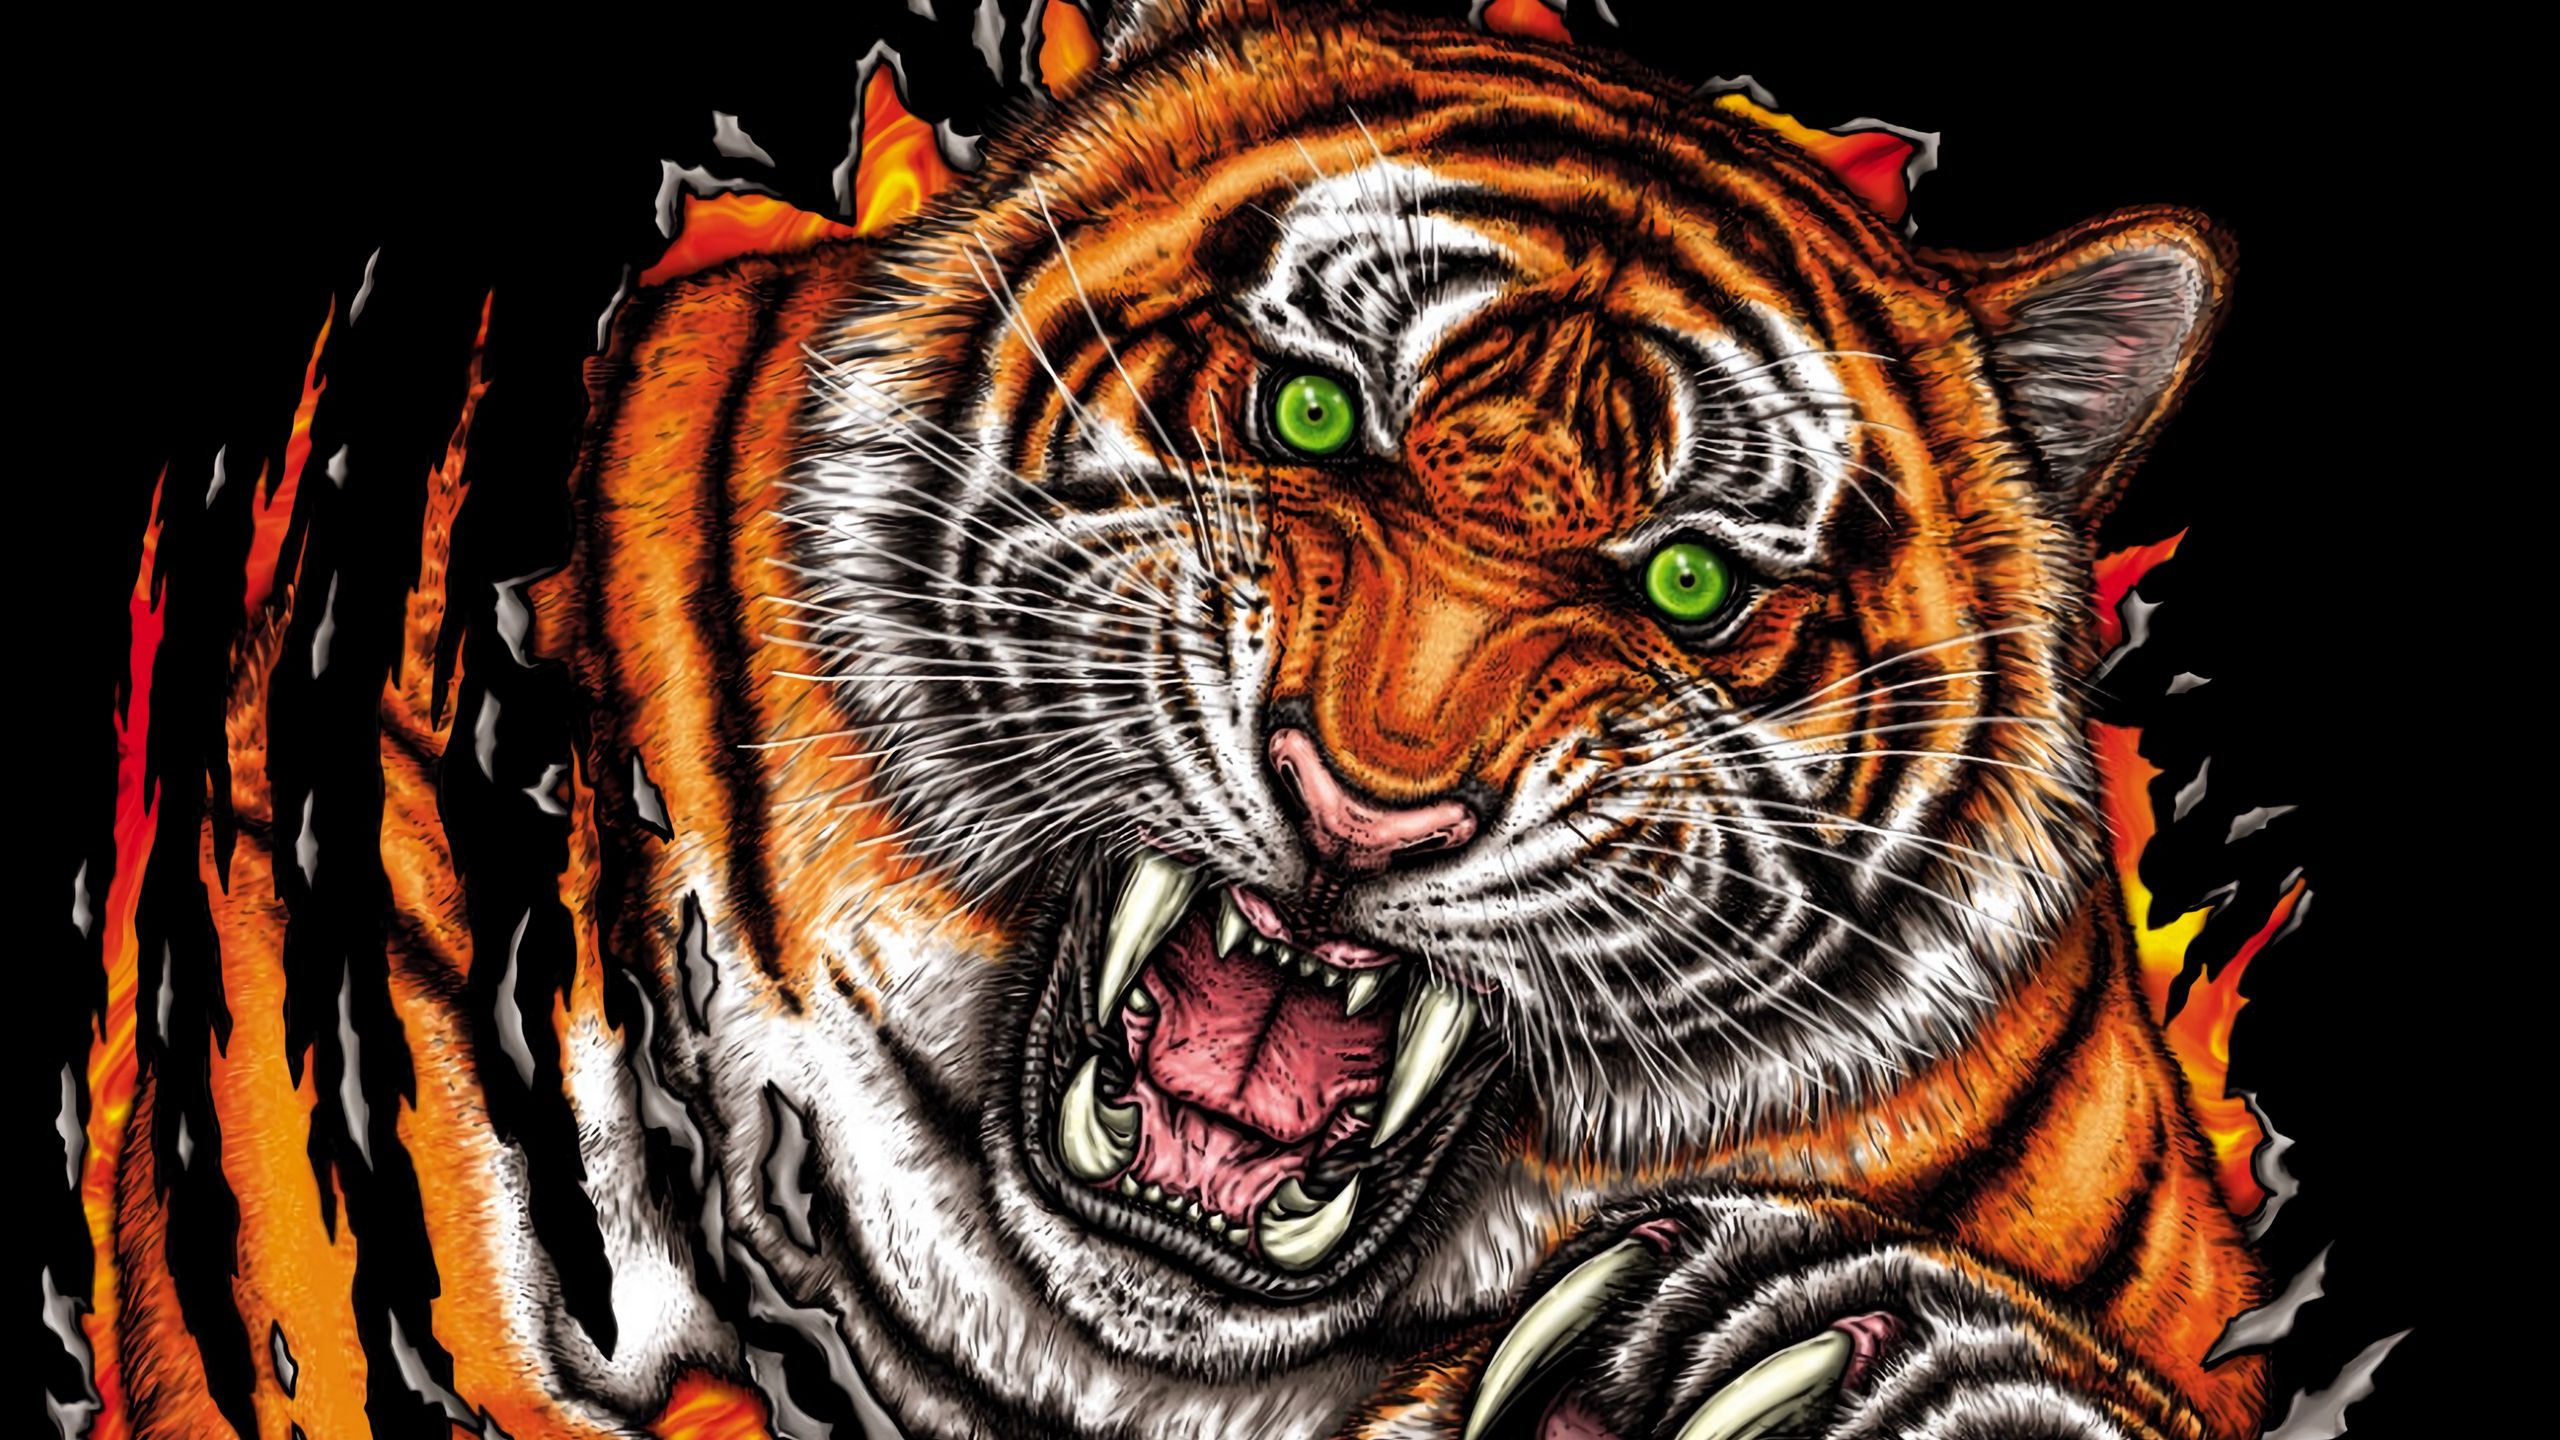 Fire Tiger Live Wallpaper  APK Download for Android  Aptoide